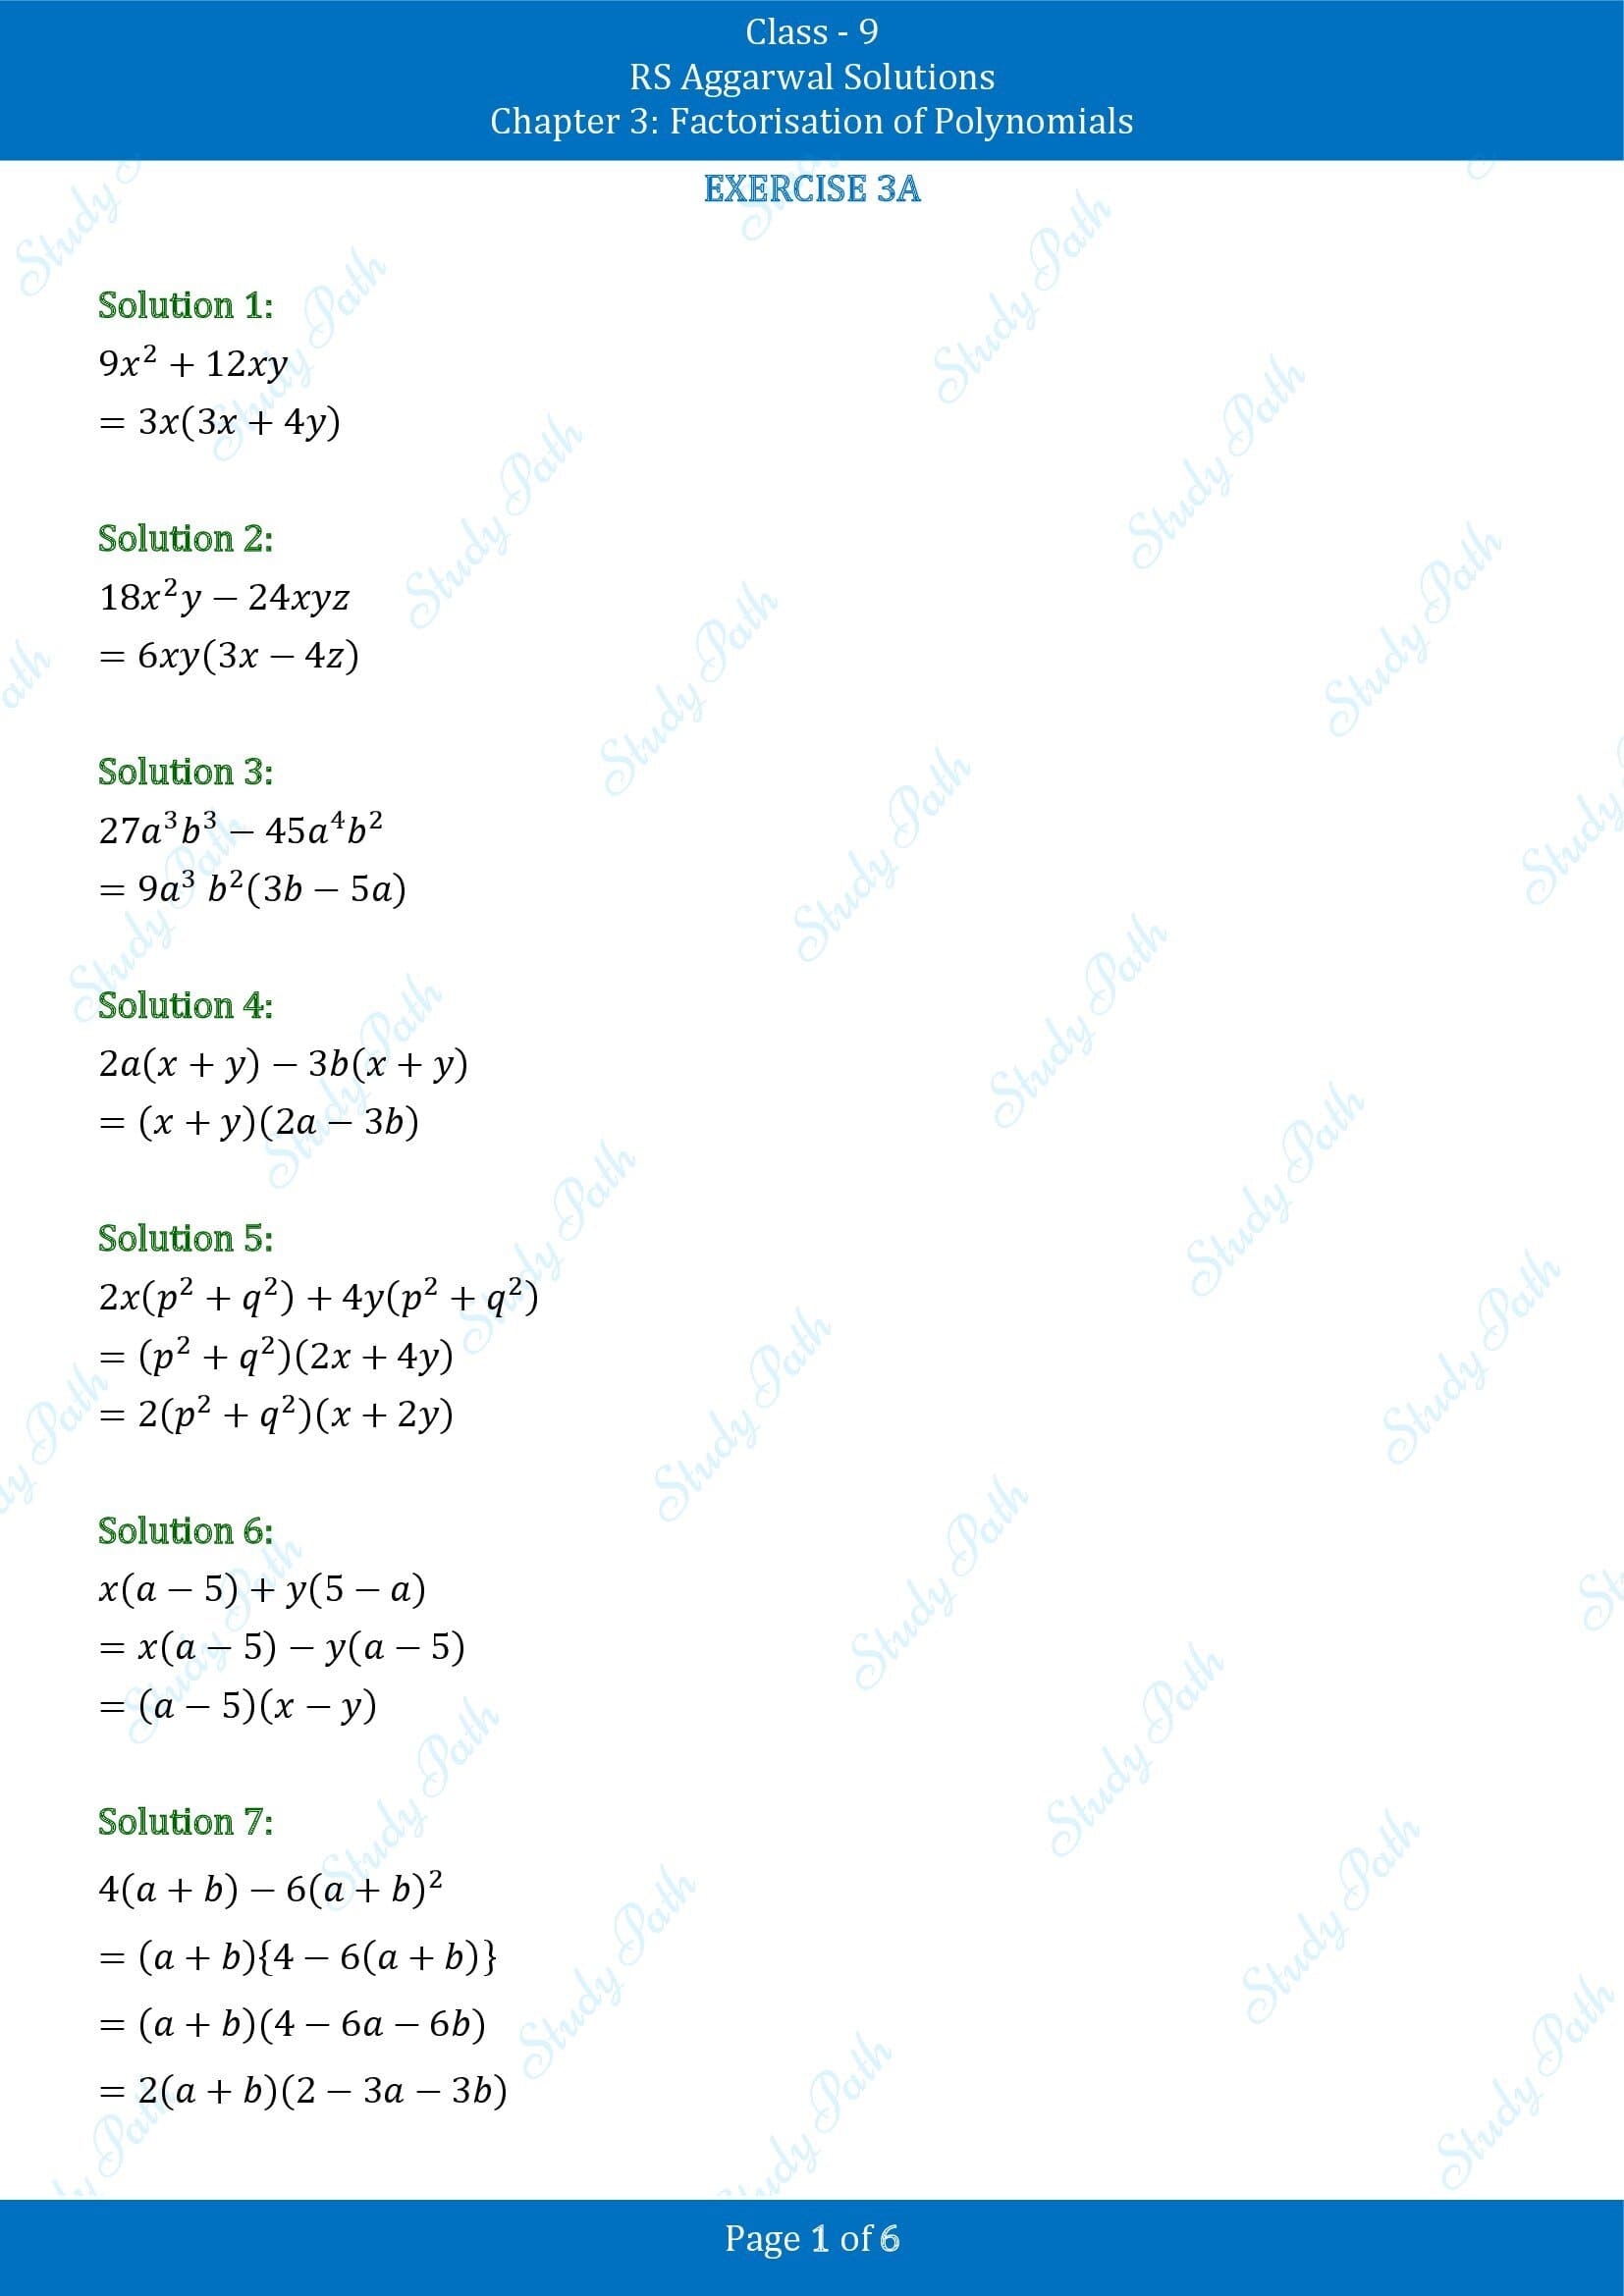 RS Aggarwal Solutions Class 9 Chapter 3 Factorisation of Polynomials Exercise 3A 00001